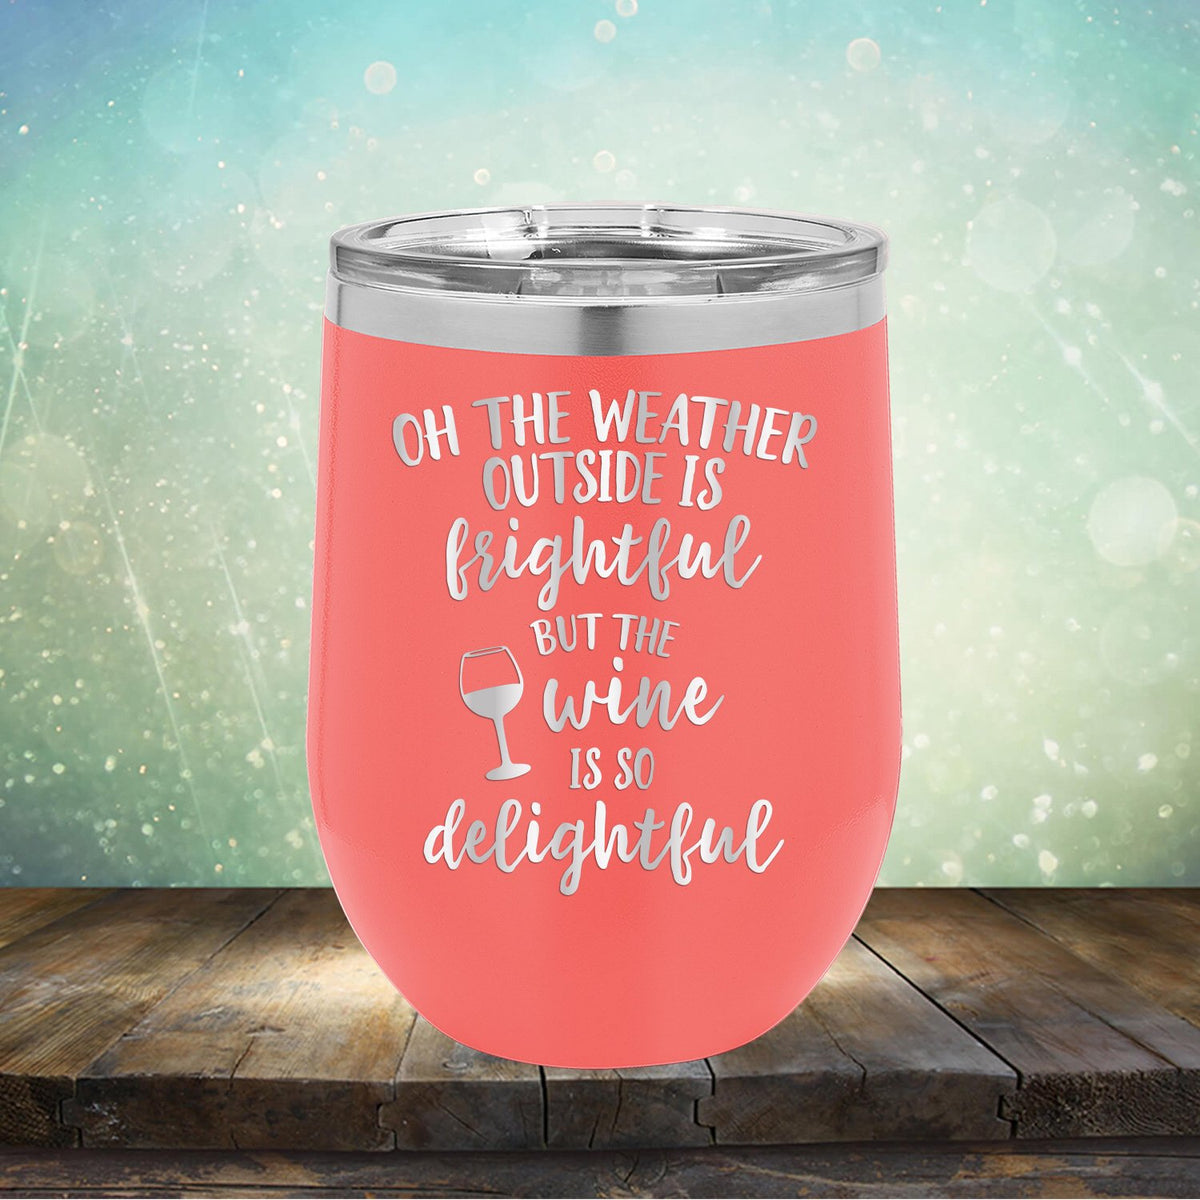 Oh The Weather Outside is Frightful But The Wine is So Delightful - Stemless Wine Cup